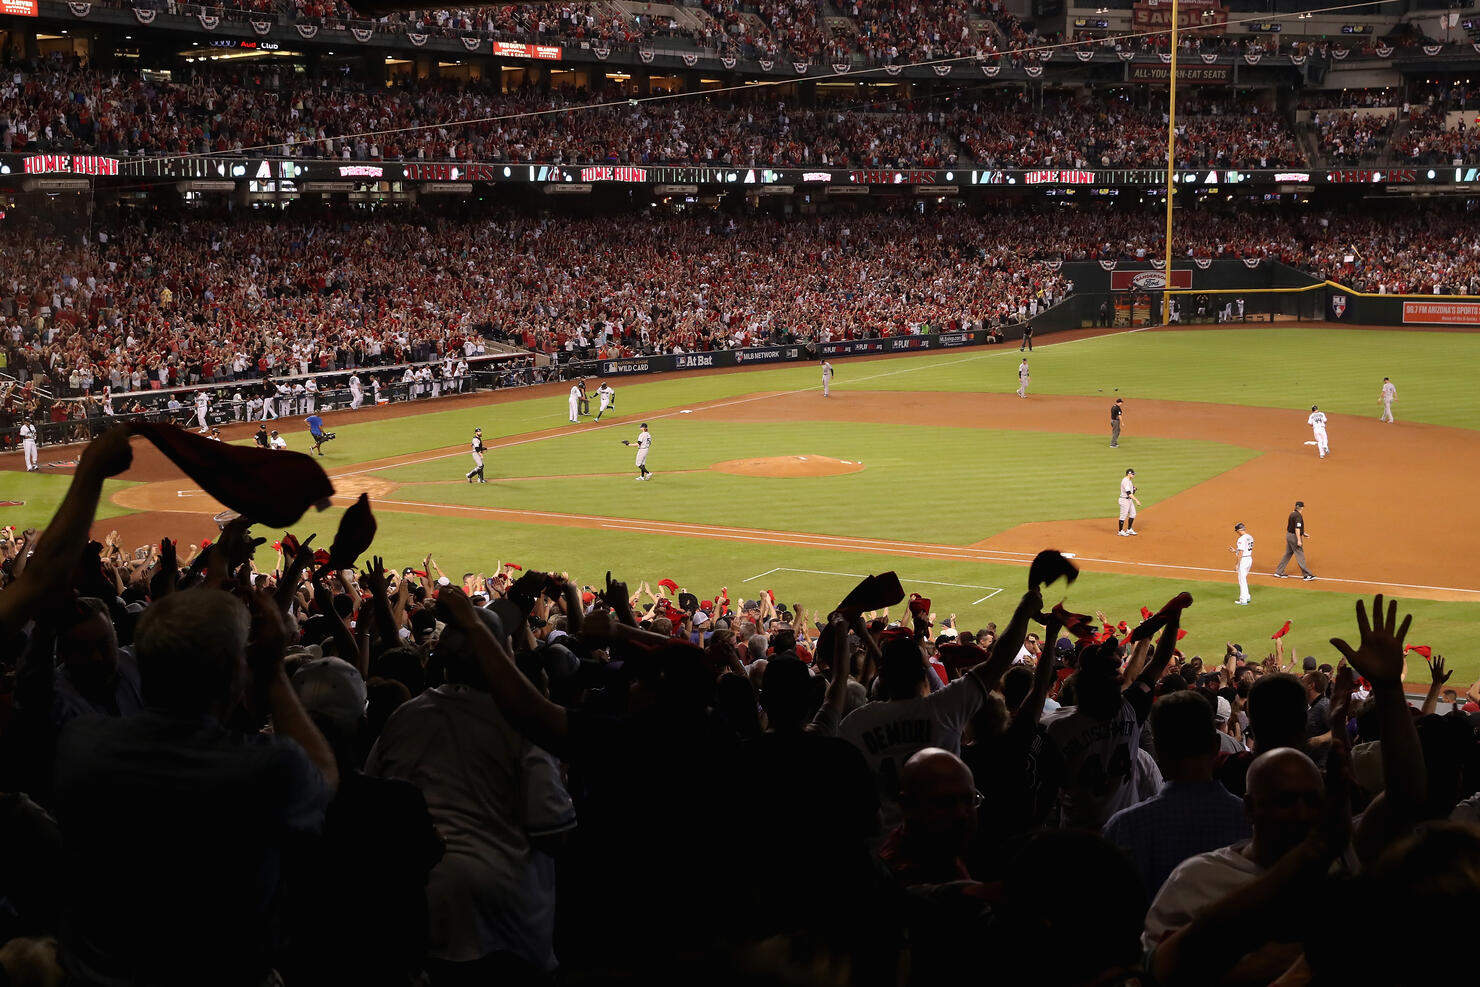 Press release: D-backs Announce New Bag Policy for All Events at Chase Field